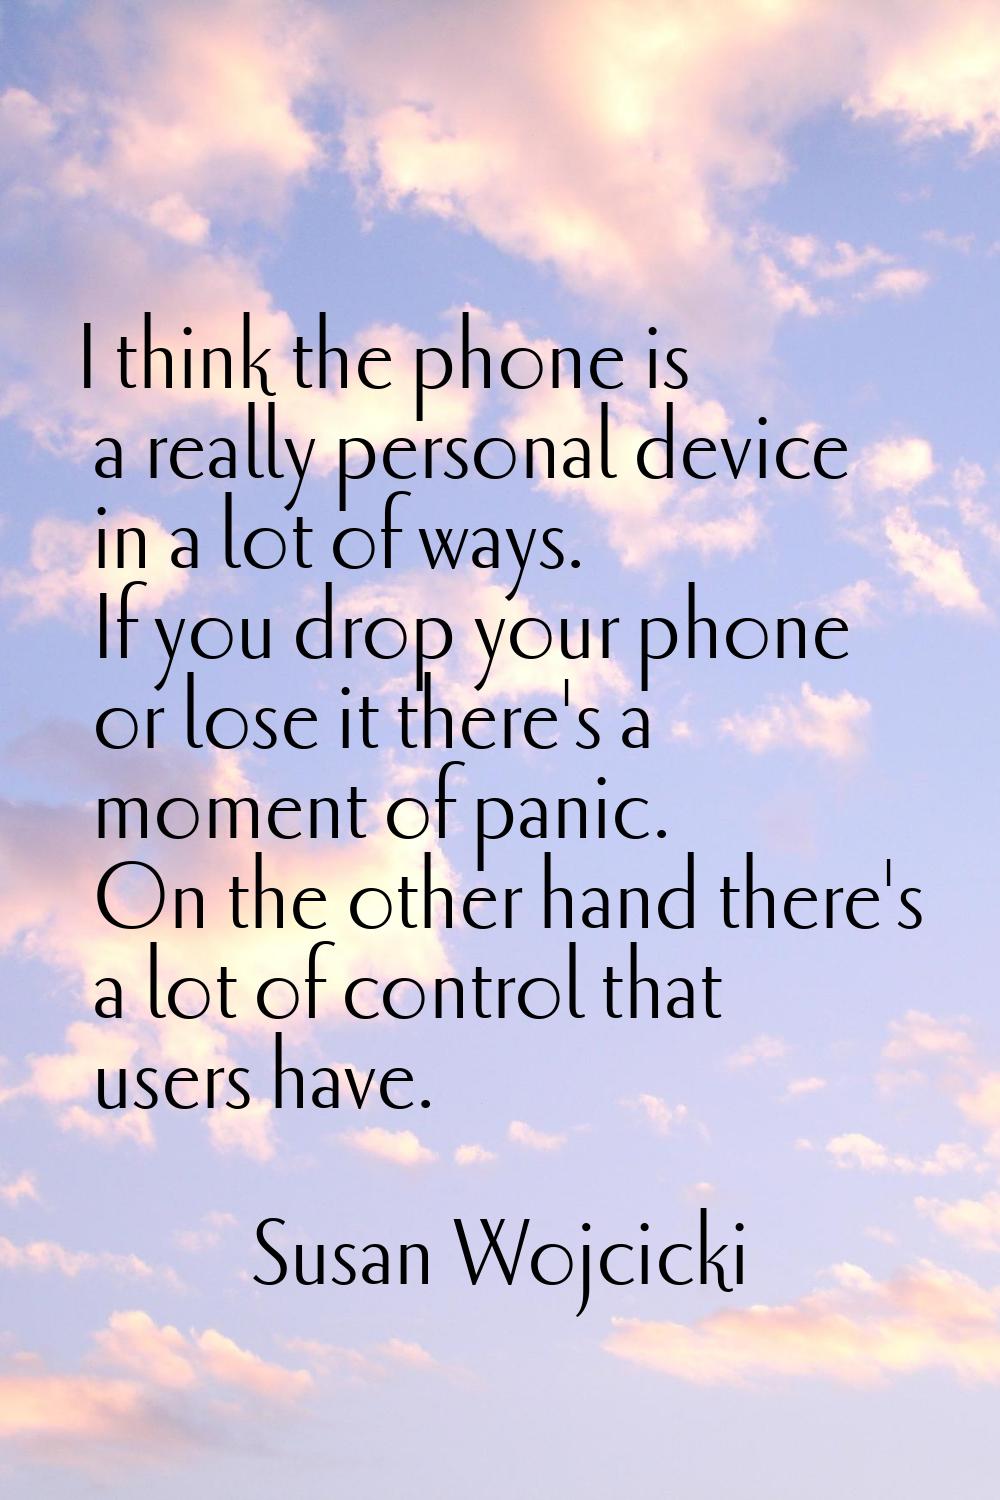 I think the phone is a really personal device in a lot of ways. If you drop your phone or lose it t